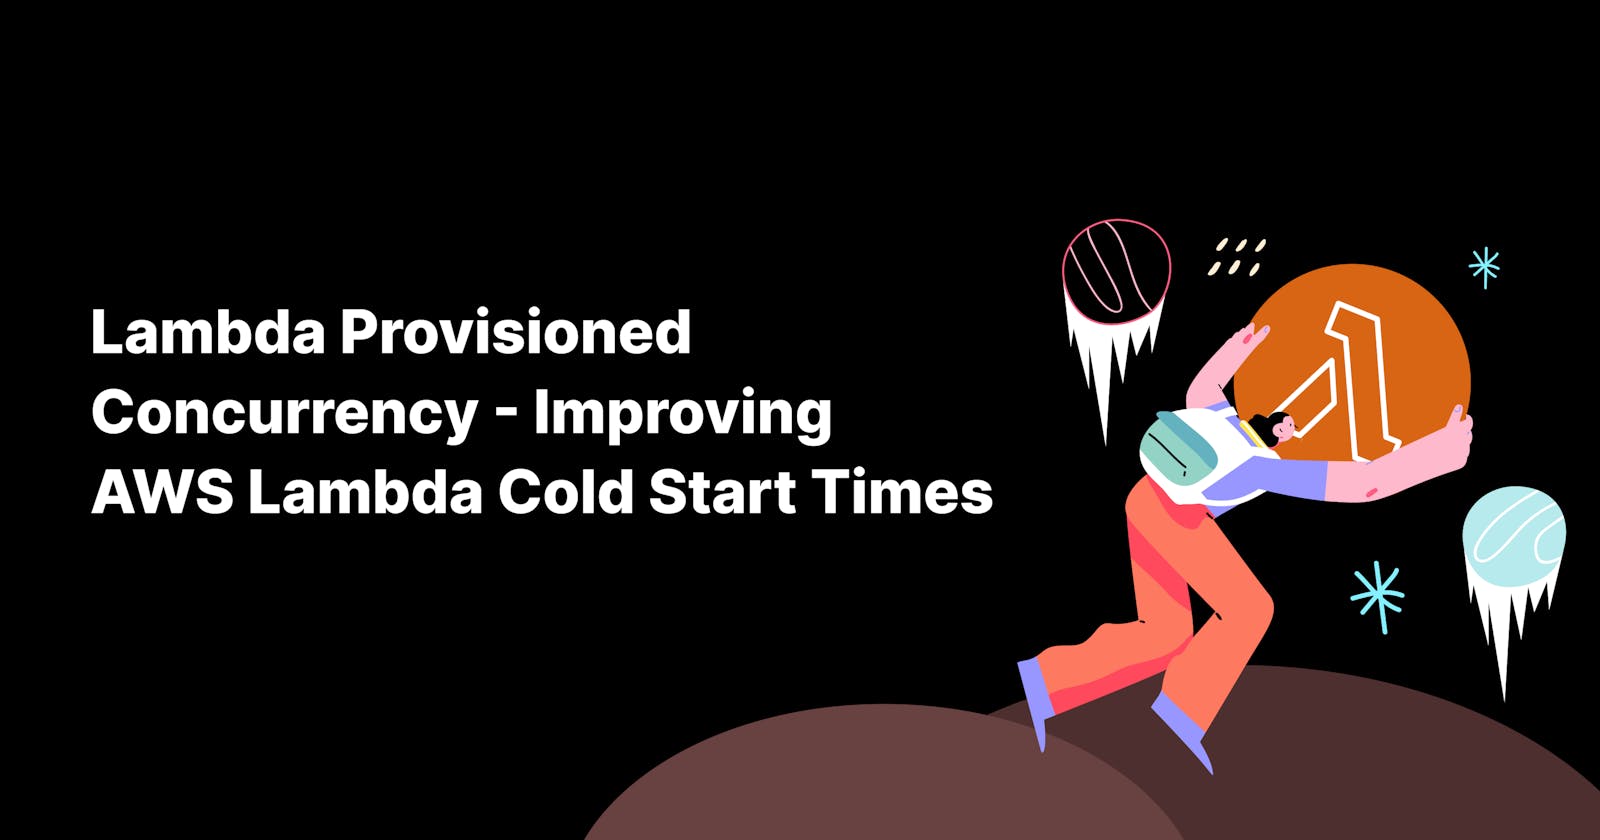 Lambda Provisioned Concurrency - Improving AWS Lambda Cold Start Times